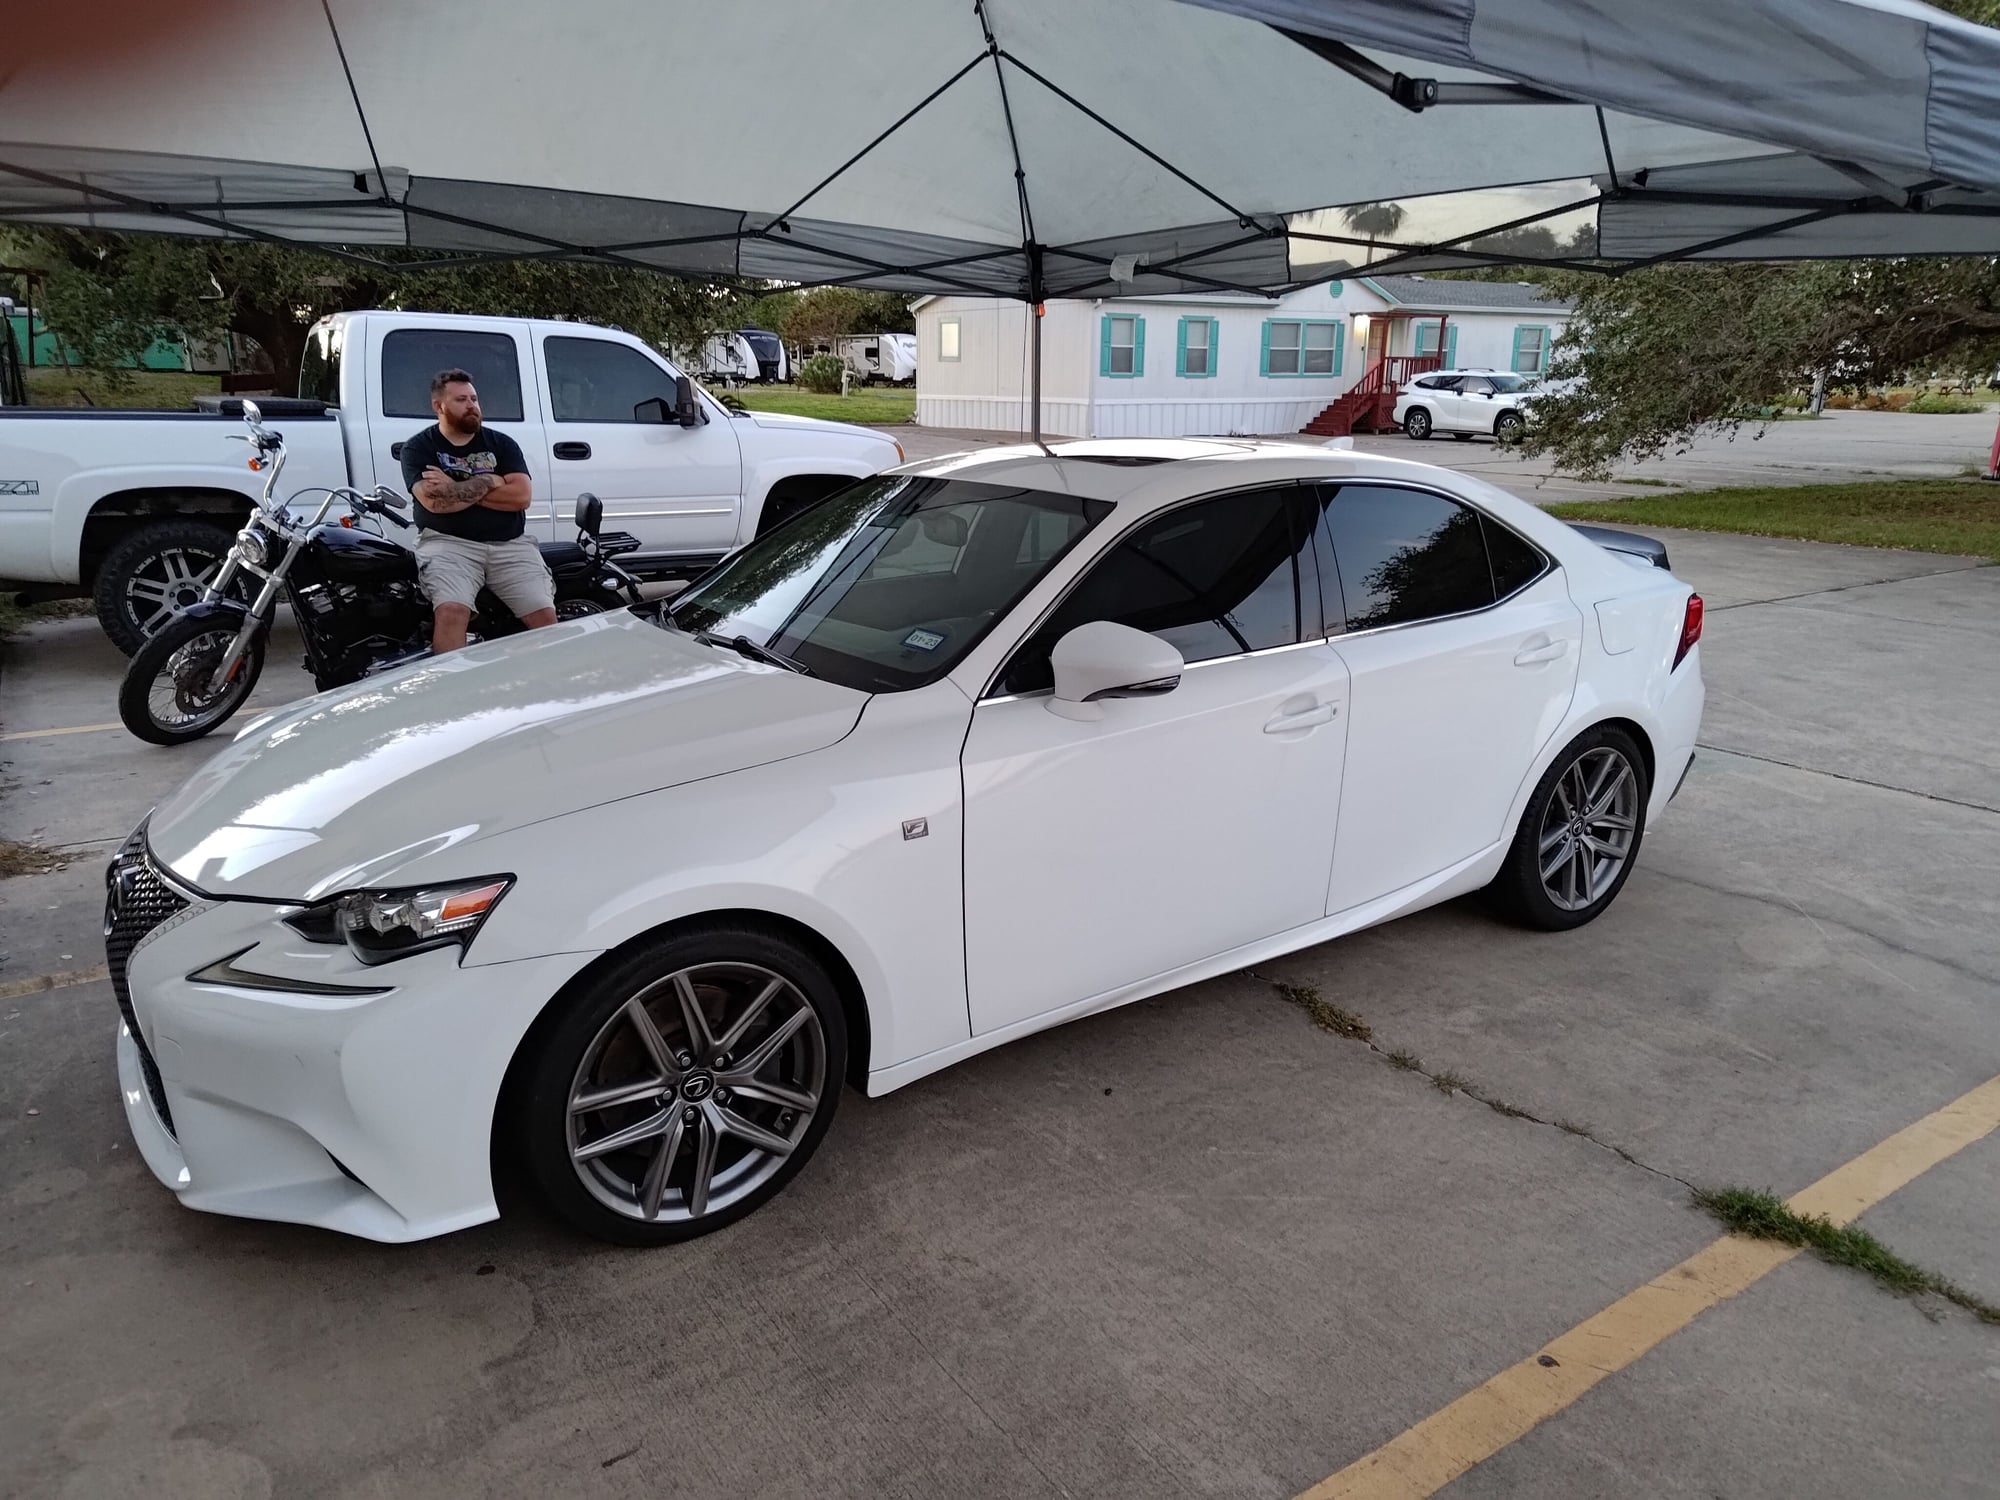 2014 Lexus IS350 - Selling 2014 Lexus IS350 F sport Ultra White w/ Red interior - Used - VIN JTHBE1D24E5012558 - 158,614 Miles - 6 cyl - 2WD - Automatic - Sedan - White - Rockport, TX 78382, United States